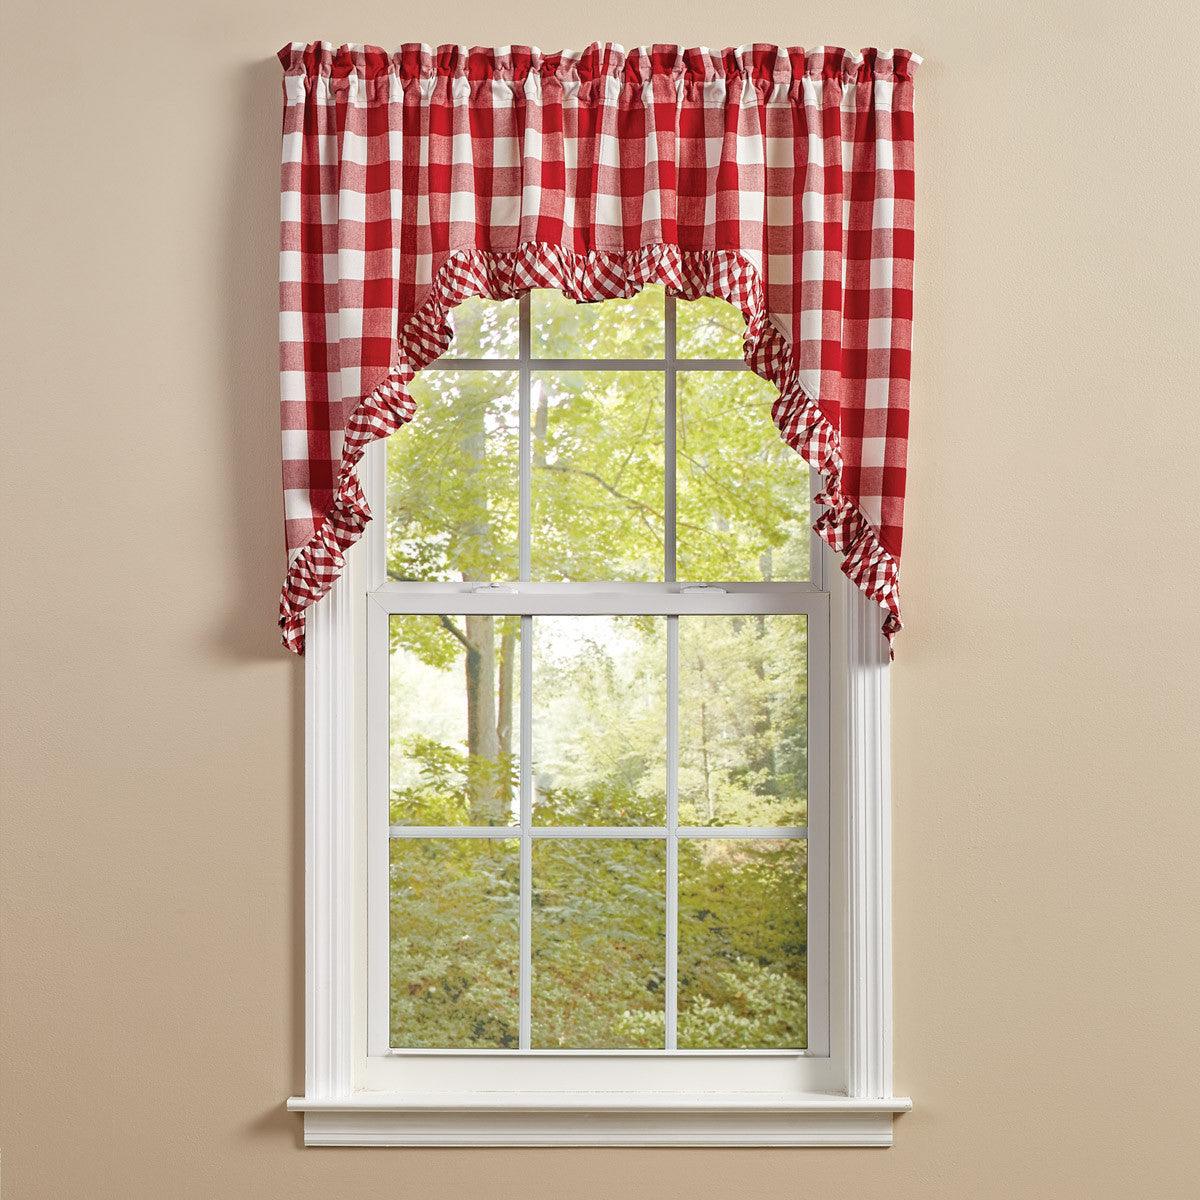 Wicklow Ruffled Swags - Red 72x36 Park Designs - The Fox Decor